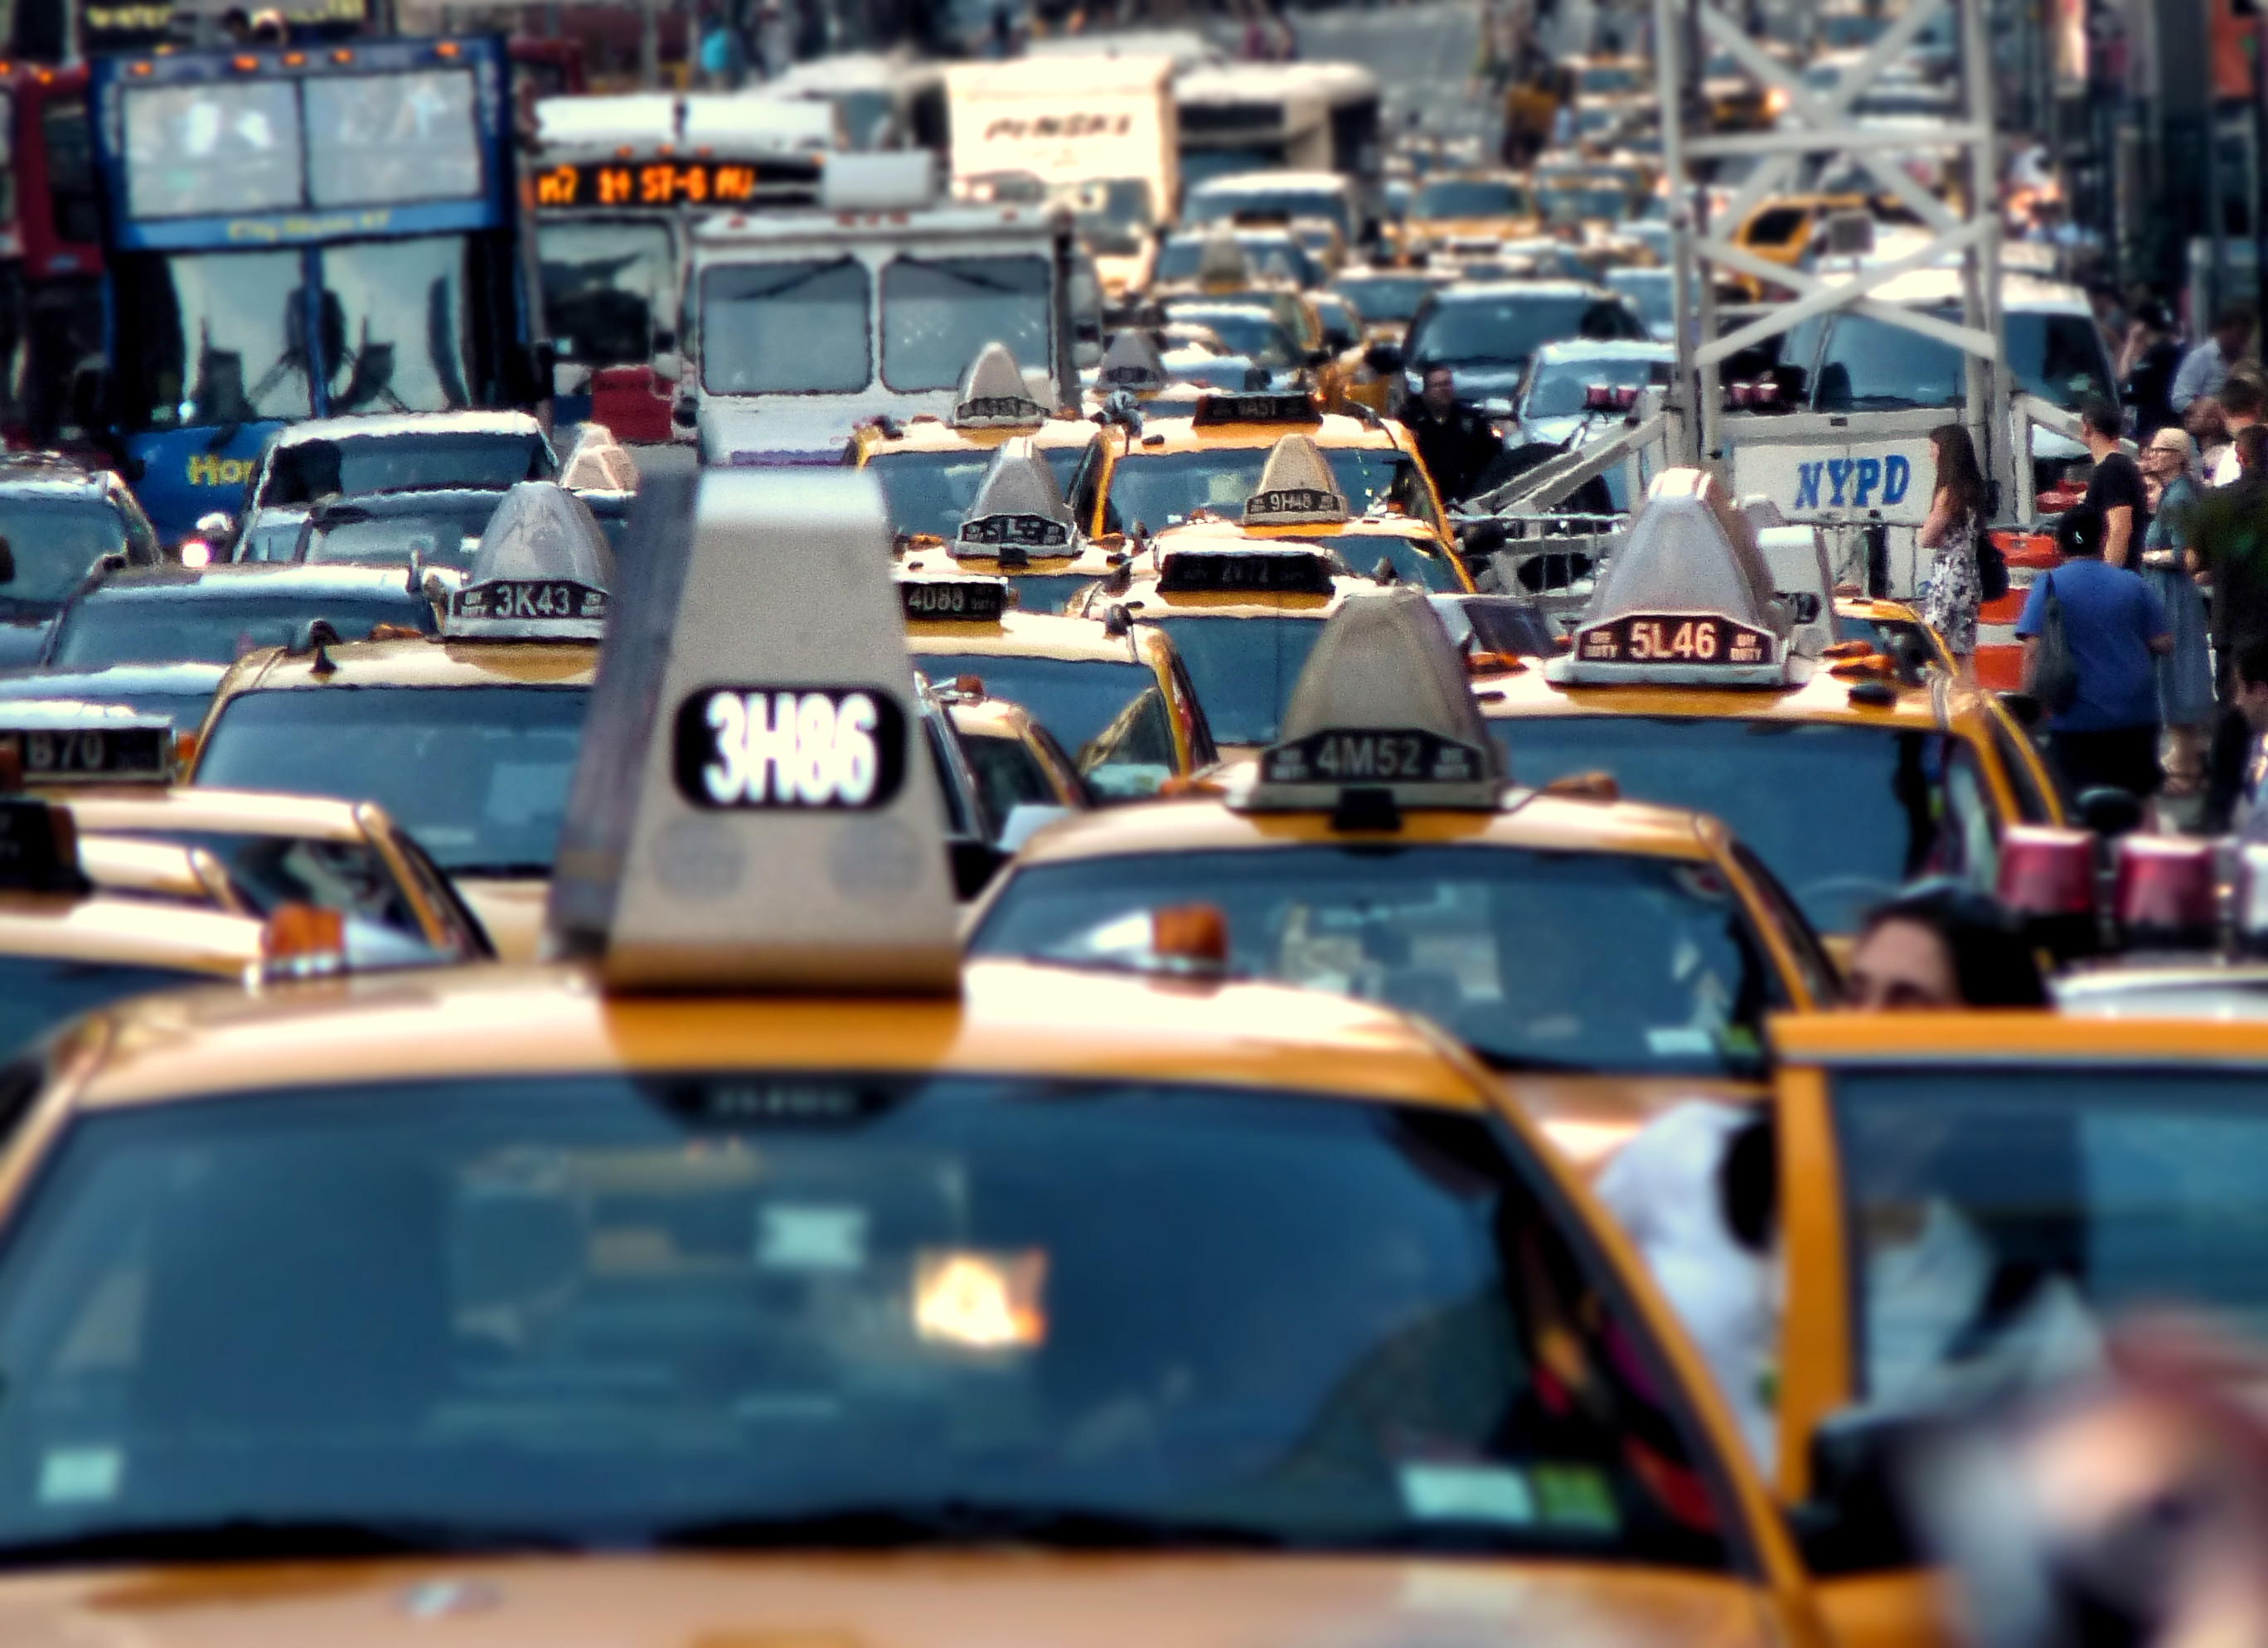 Cabs_Congestion